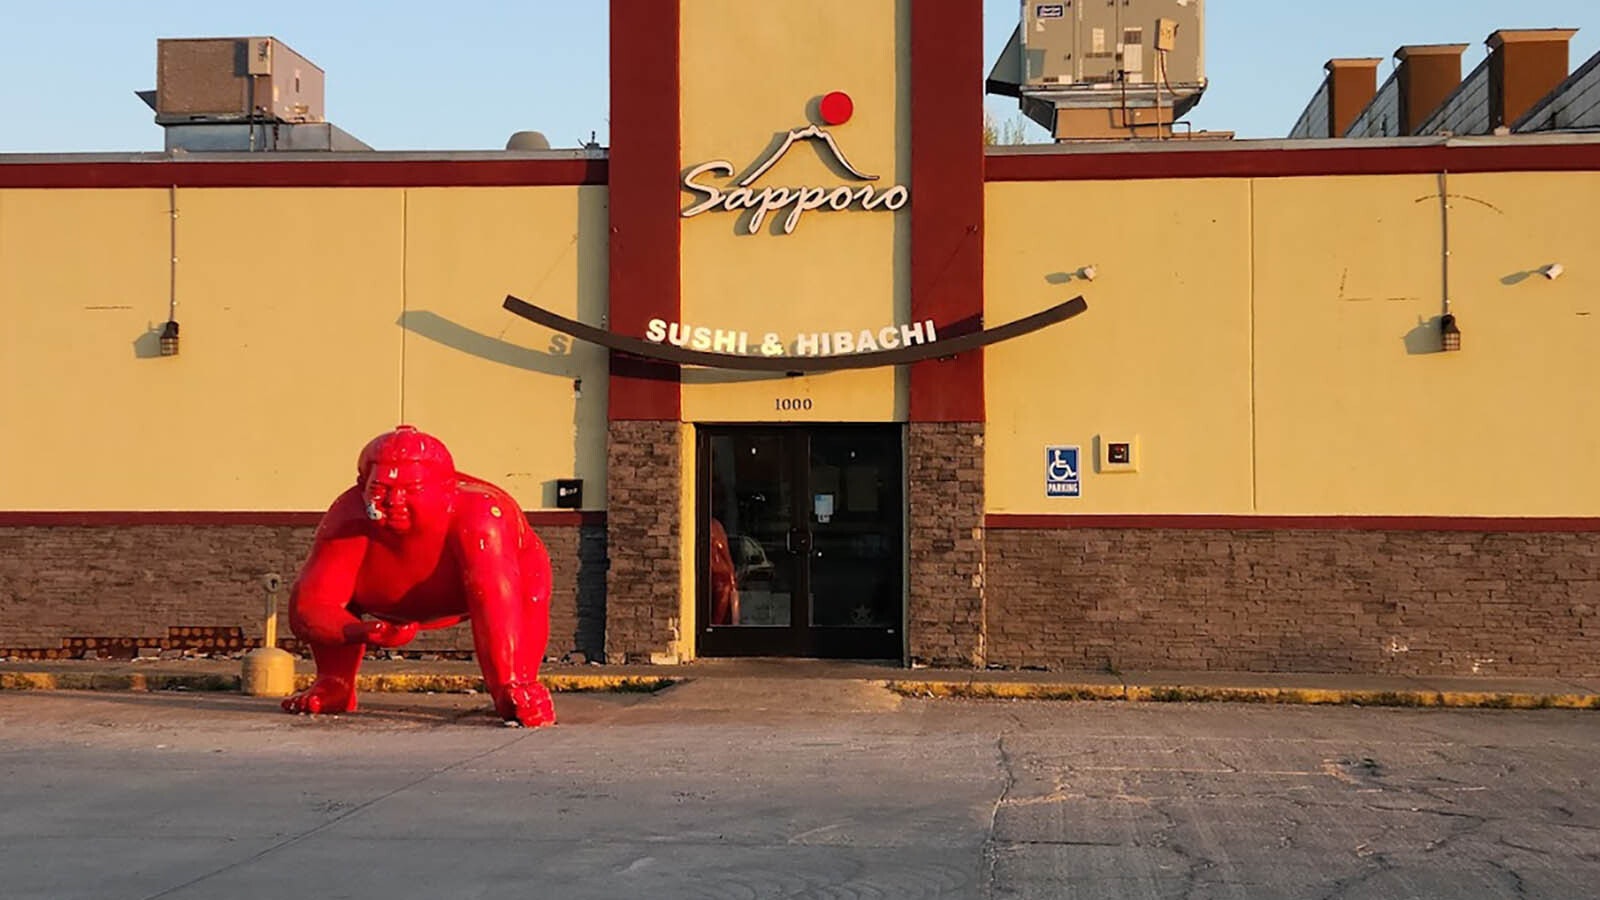 The Sapporo restaurant in Gillette, Wyoming.